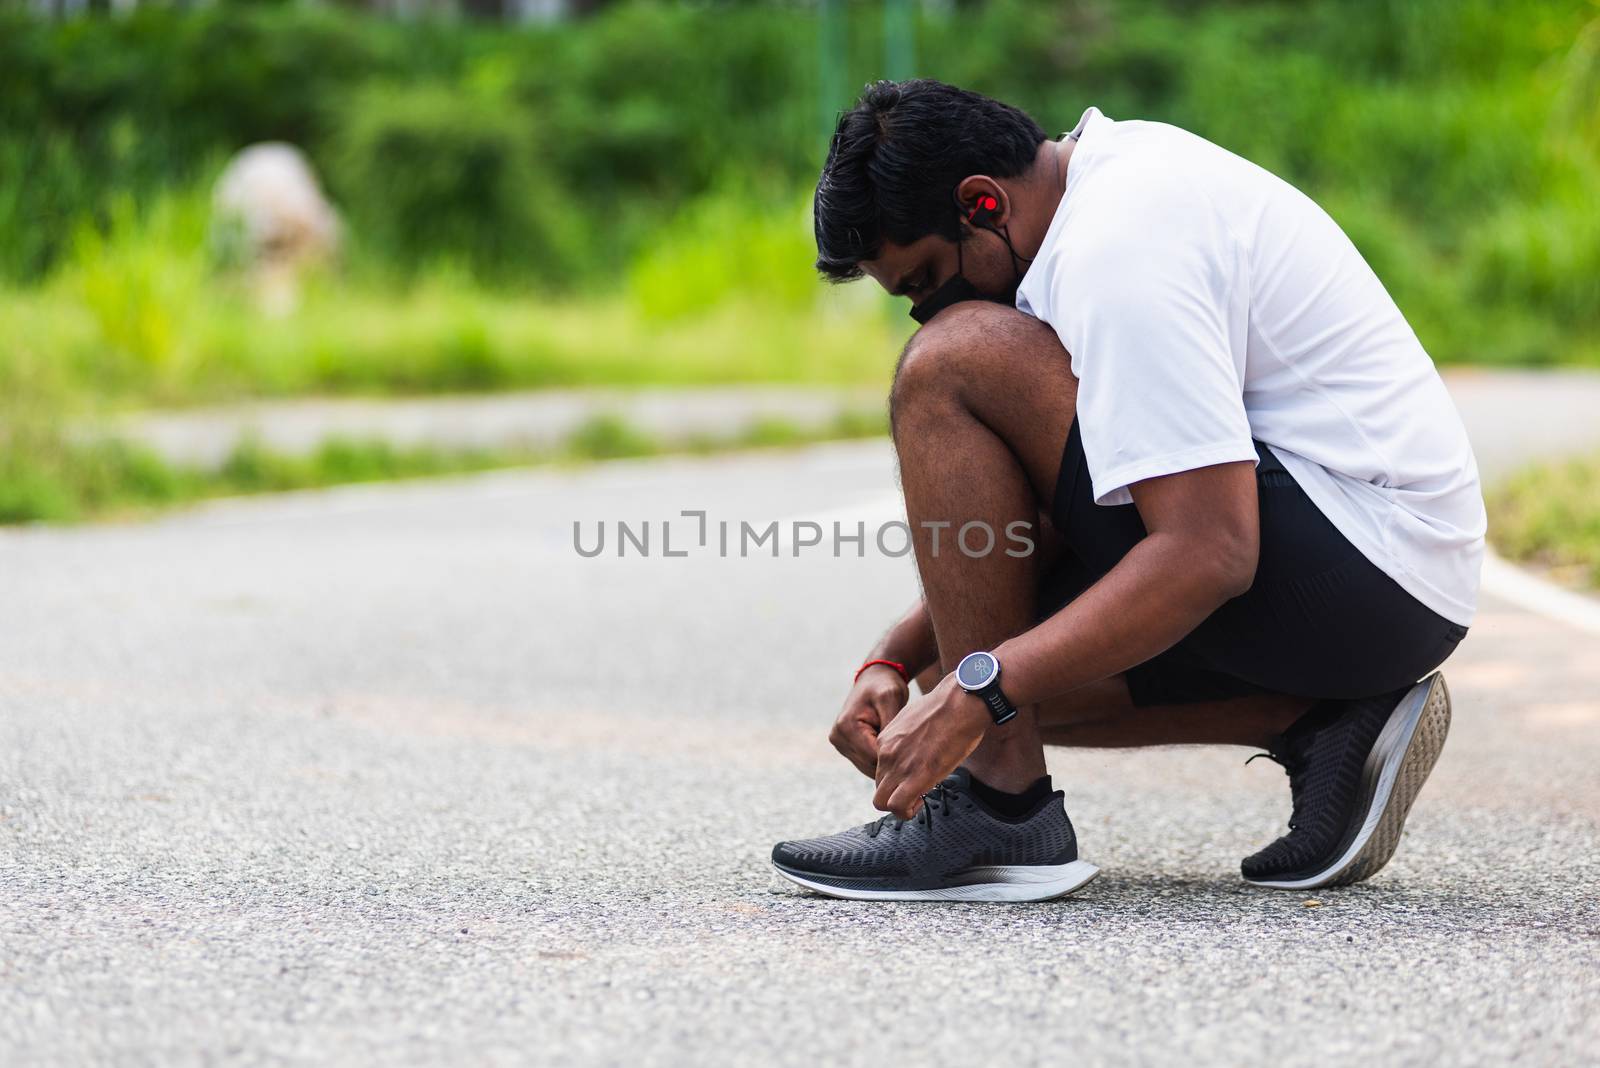 Close up Asian sport runner black man wear watch sitting he trying shoelace running shoes getting ready for jogging and run at the outdoor street health park, healthy exercise workout concept